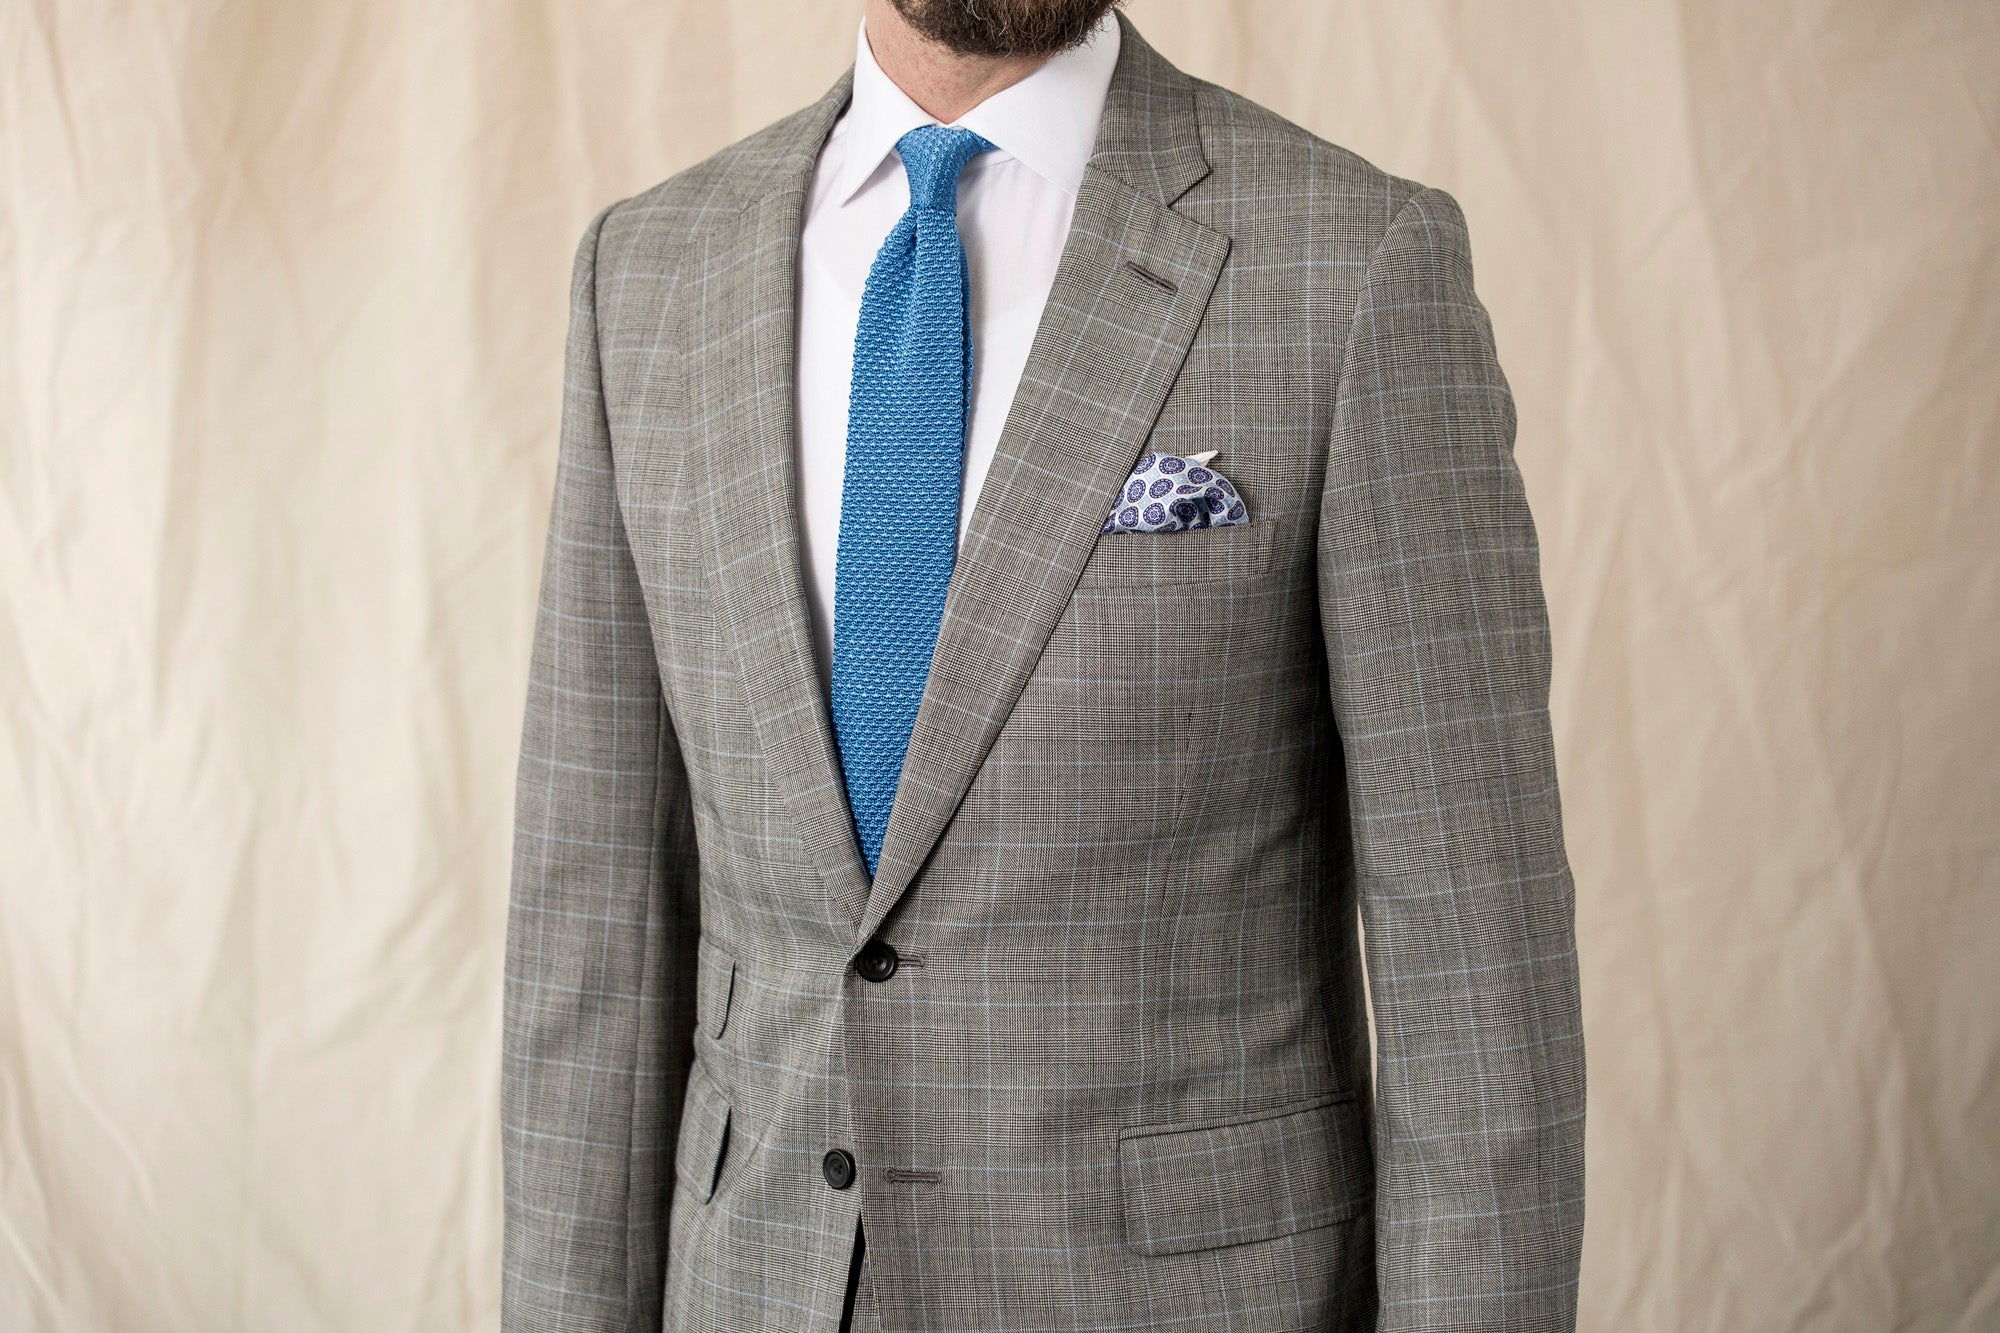 Introducing our Blue Knitted Tie & White Medallion Pocket Square Set